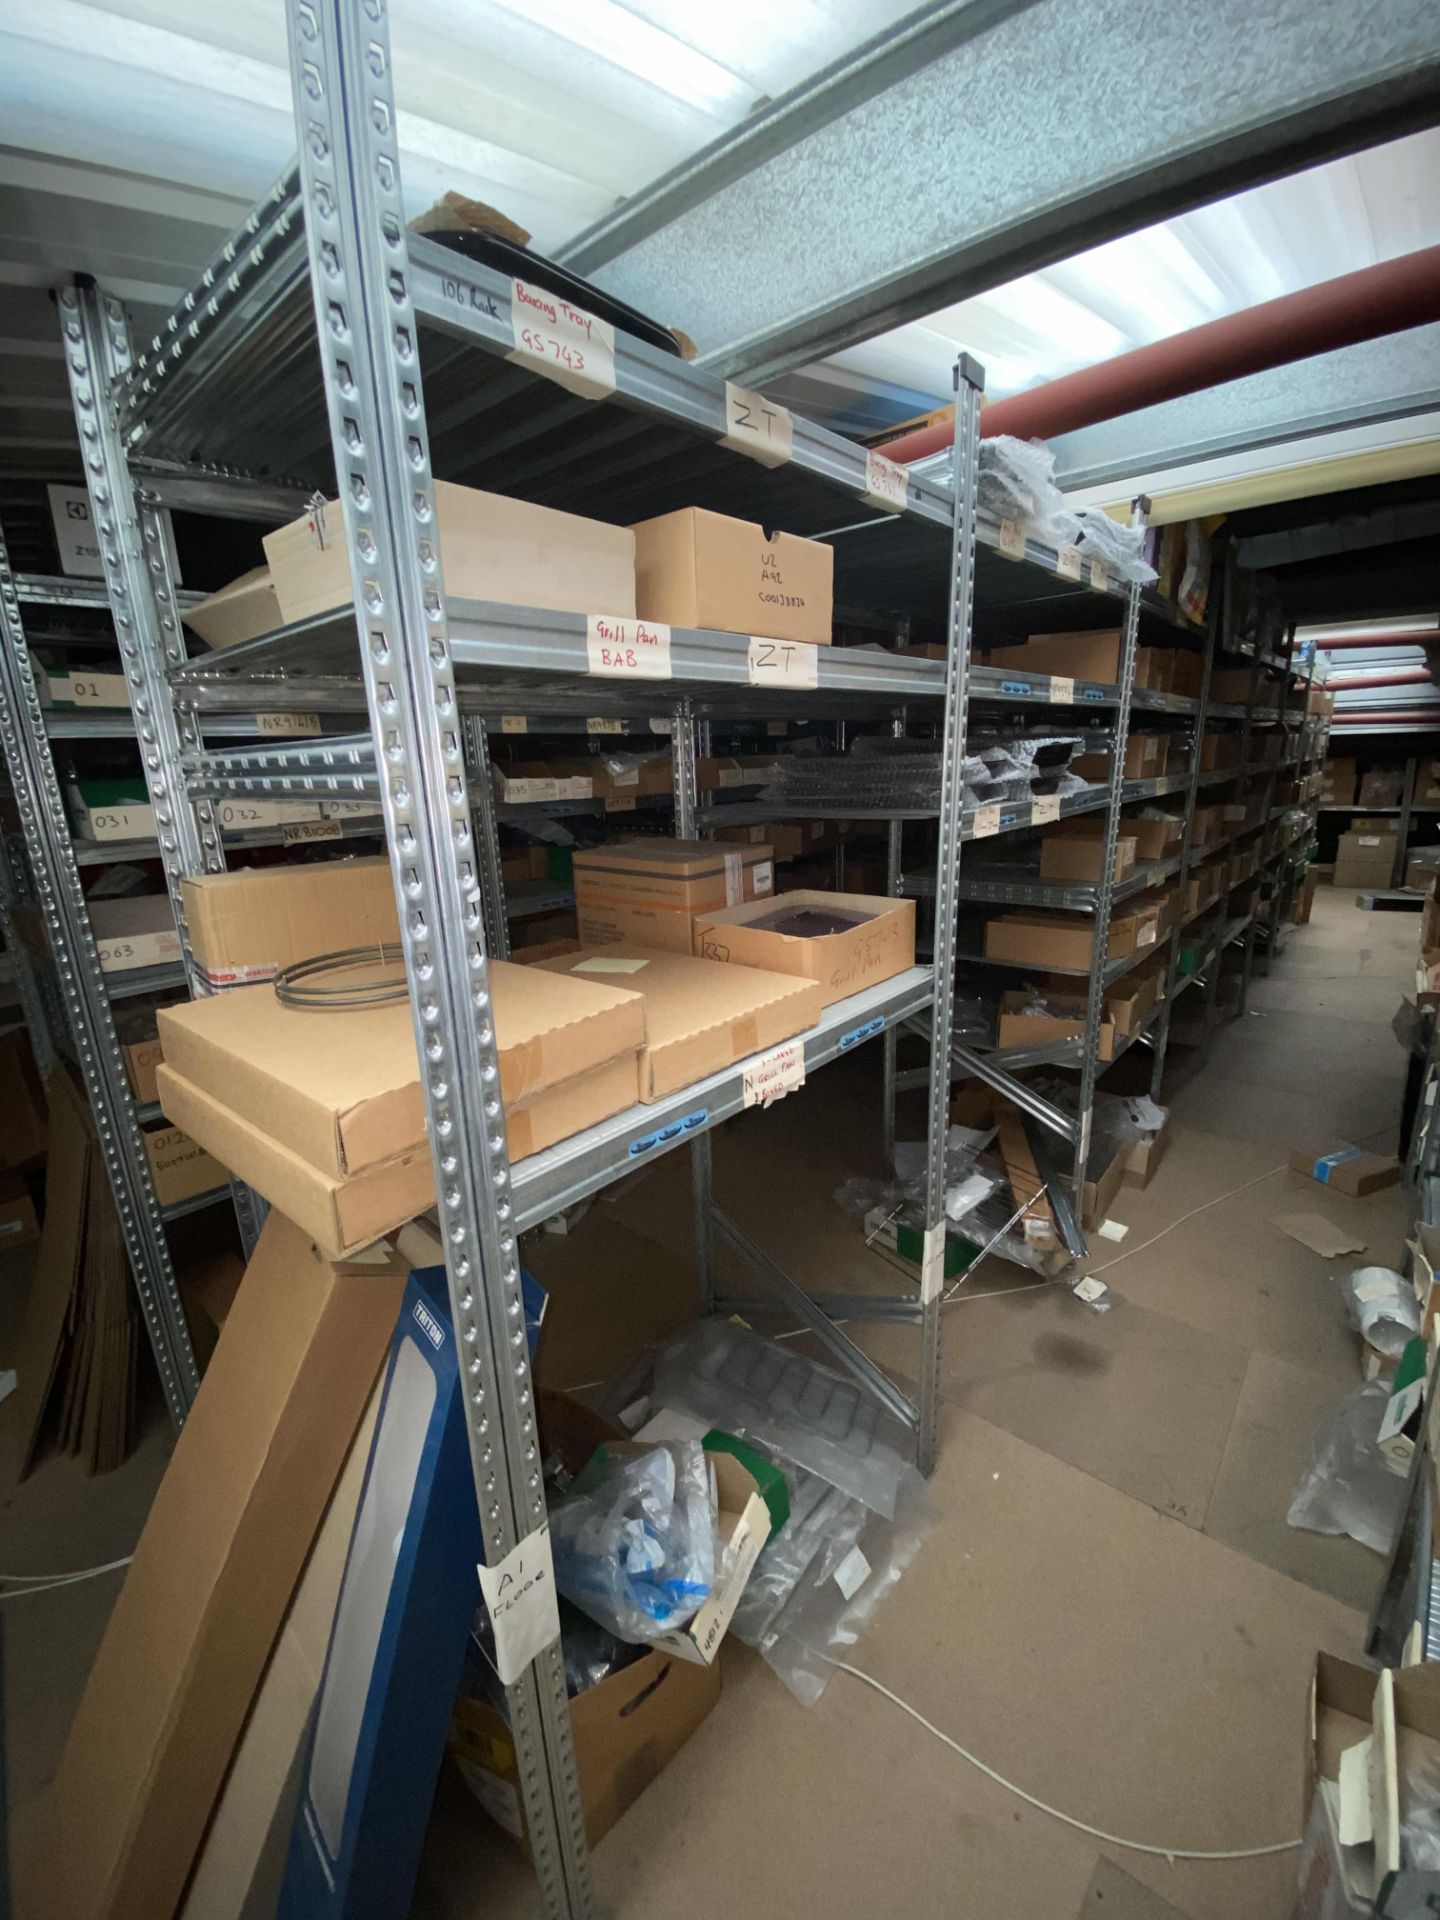 Eight Bay Multi-Tier Galvanised Steel Stock Rack, each bay approx. 950mm x 500mm, up to approx. 2m